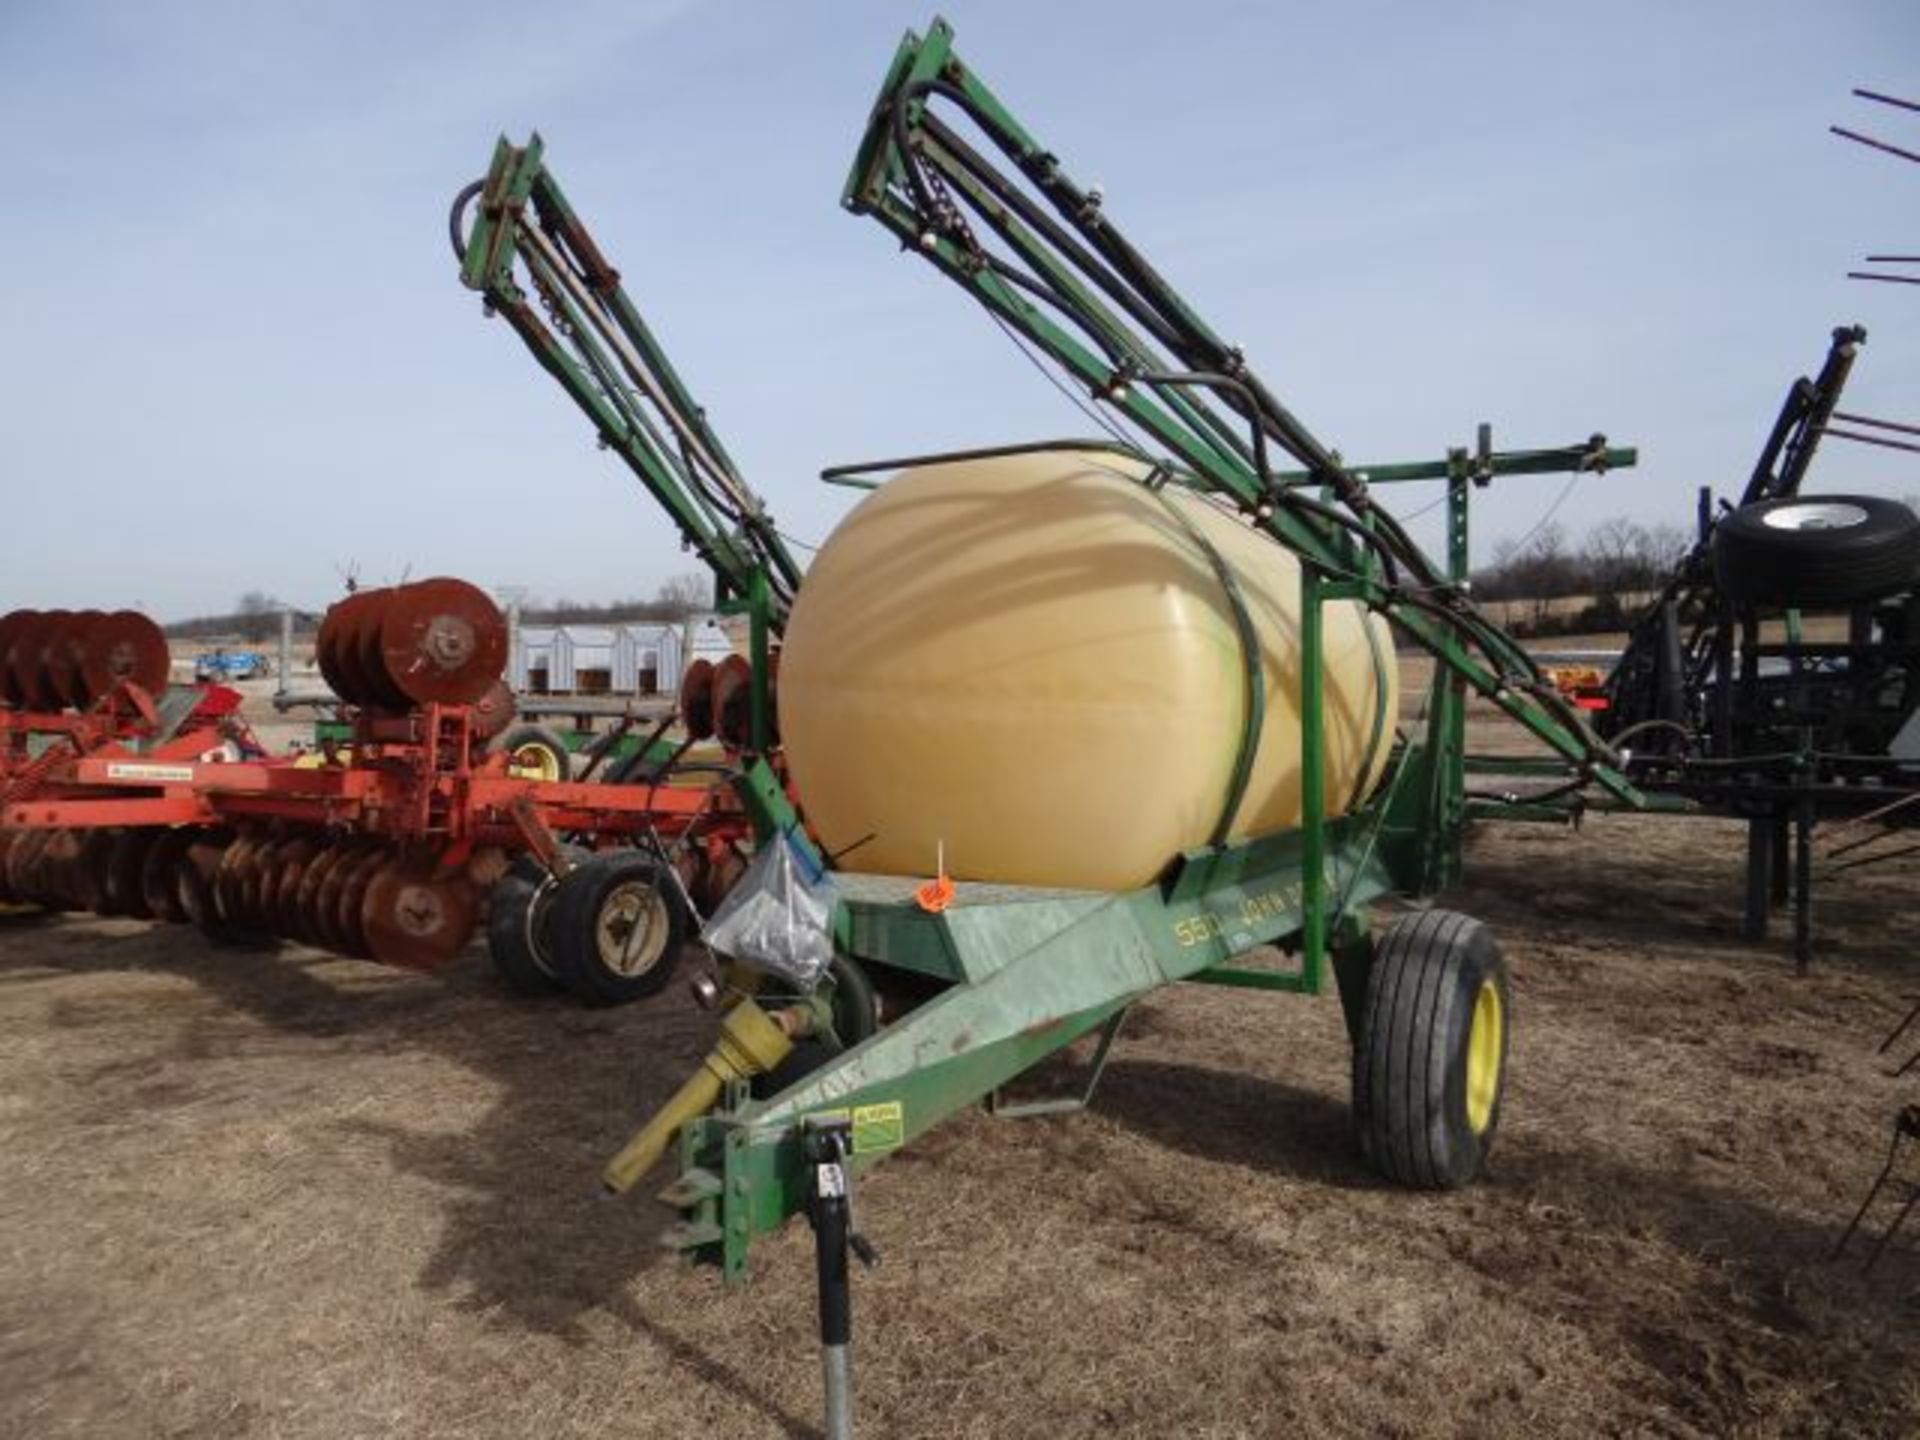 JD 550 Sprayer Pull Type, 50' Booms, Electric Shutoff for Booms, 3 Section Monitor in Shed